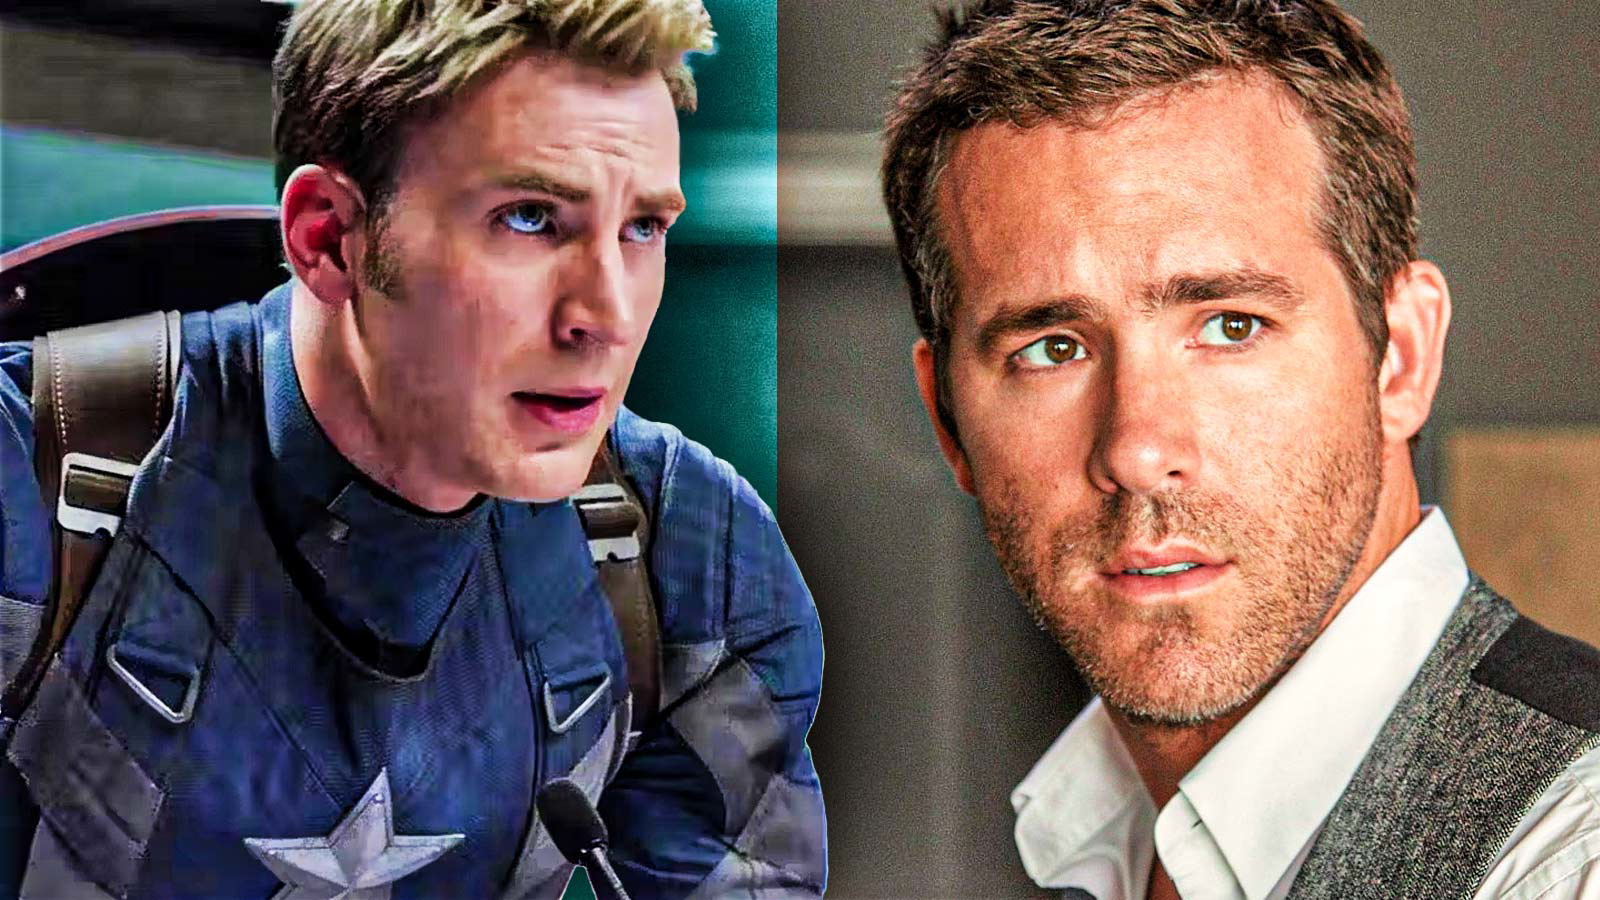 “I’m going to enjoy every second of this”: Chris Evans Was Elated When Ryan Reynolds Offered Him the Opportunity to Do 1 Thing He Could Only Dream of as Captain America